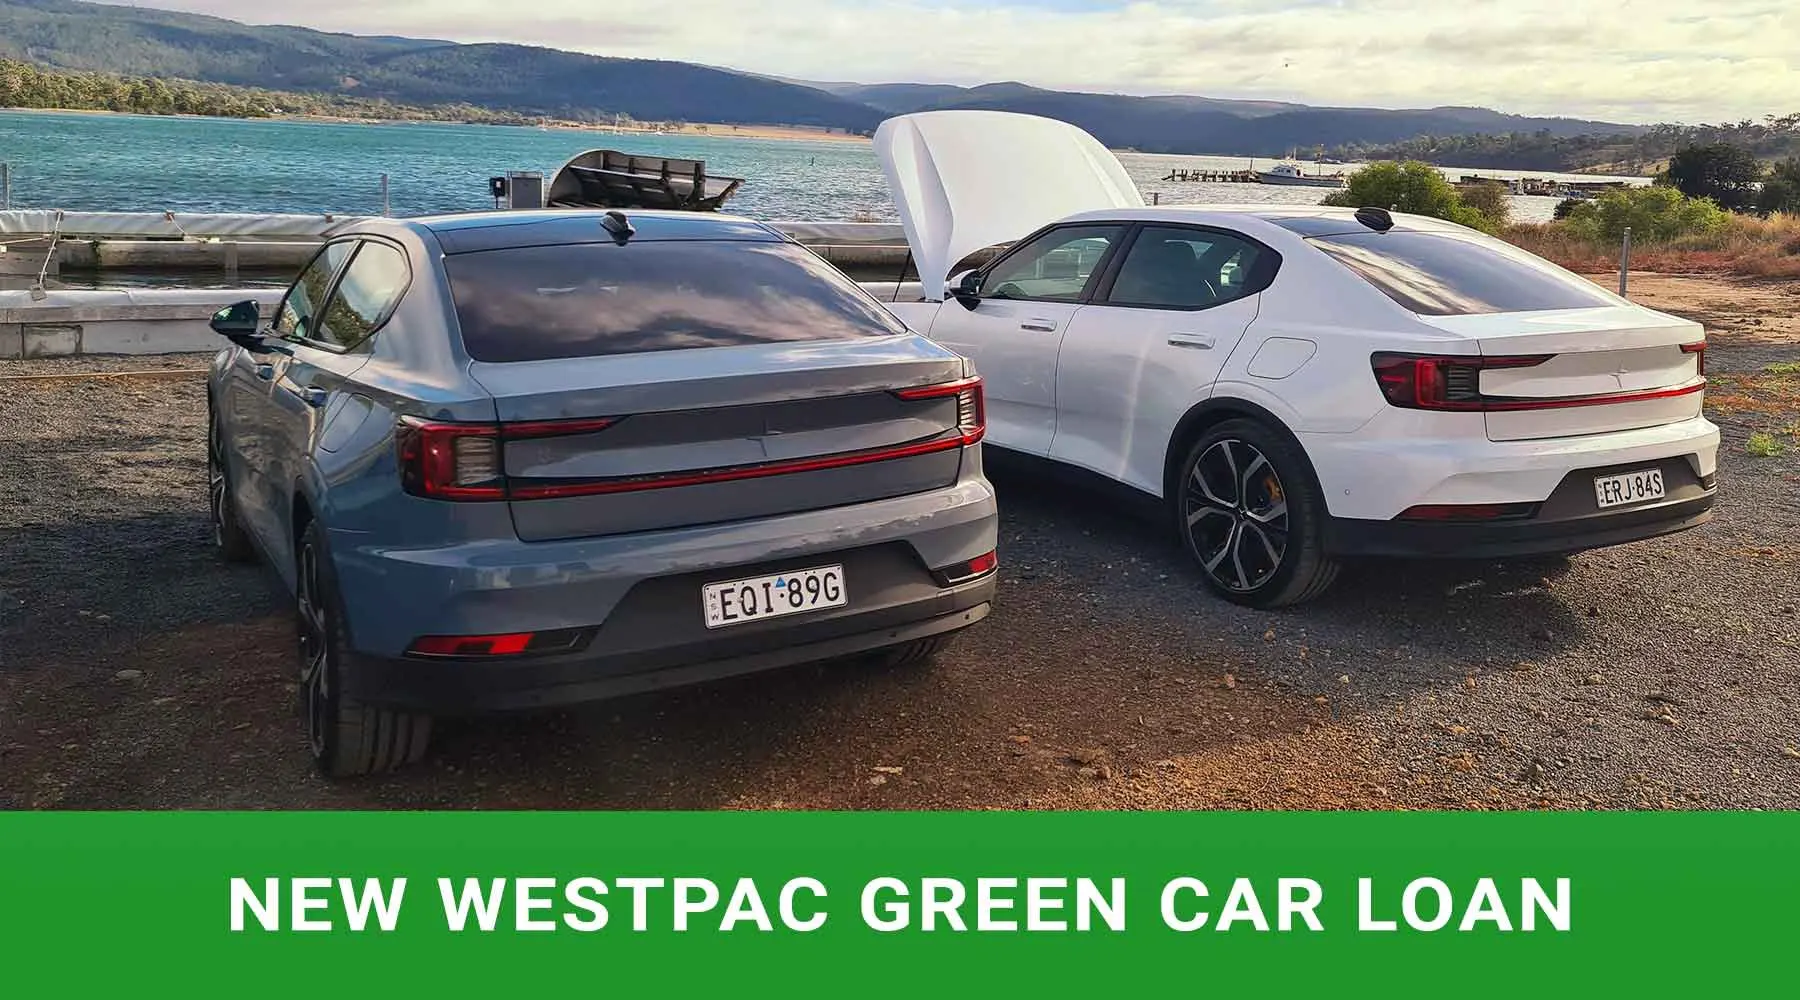 Westpac drops new low-rate car loan for electric vehicles